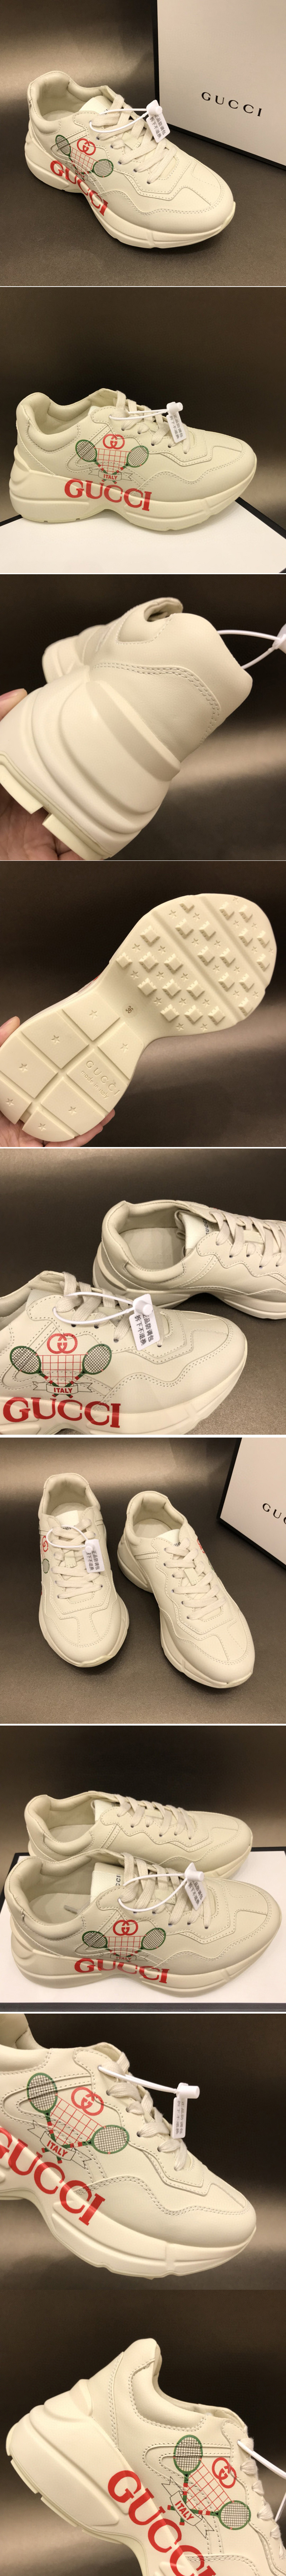 Replica Women and Men Gucci Rhyton Tennis Sneakers in White Leather